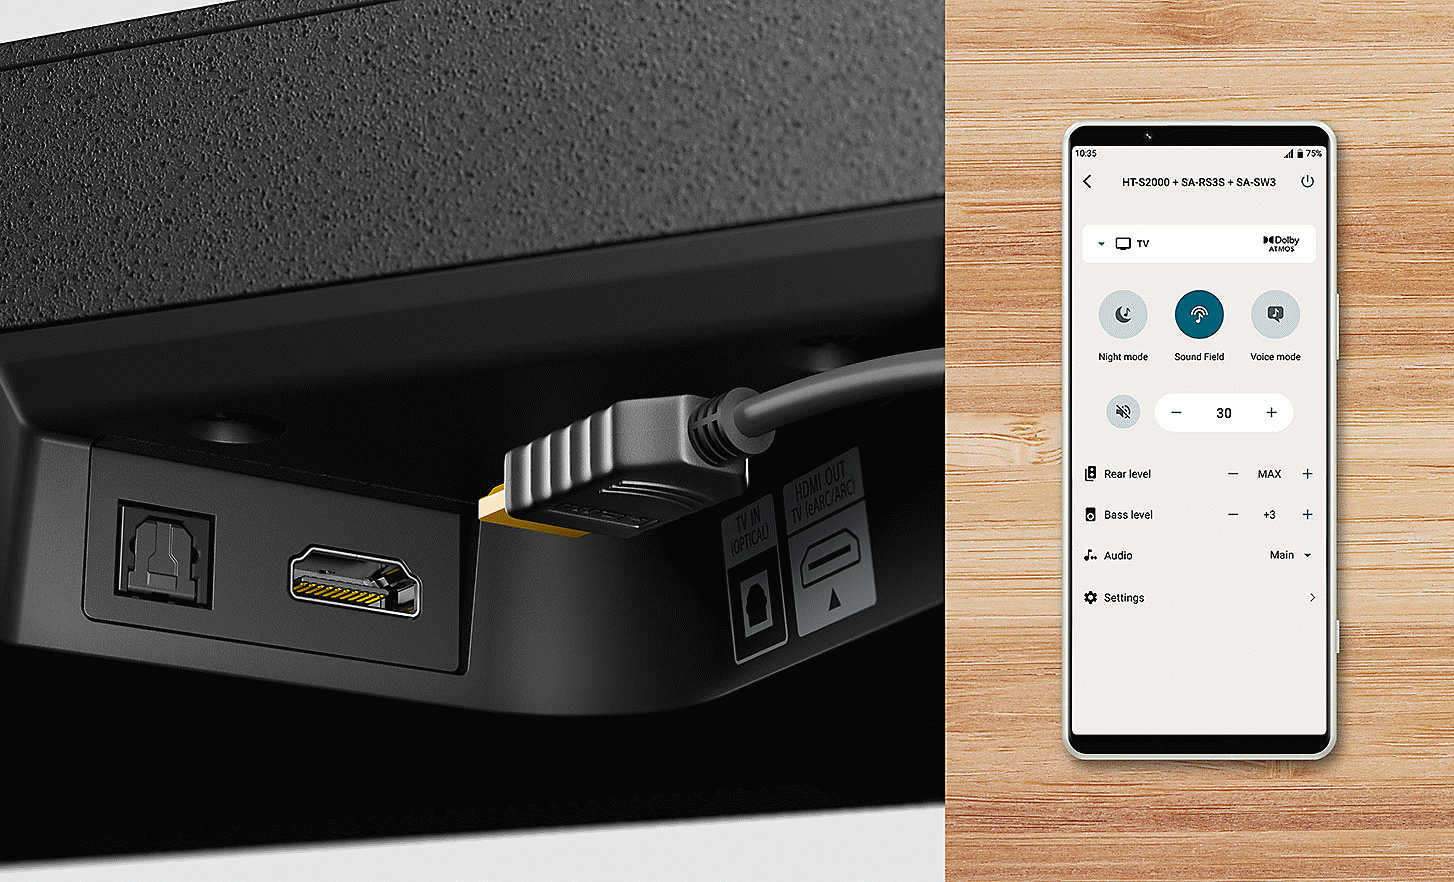 Close up image of the HT-S2000 HDMI port and a HDMI cable, with an image of a mobile phone displaying the settings